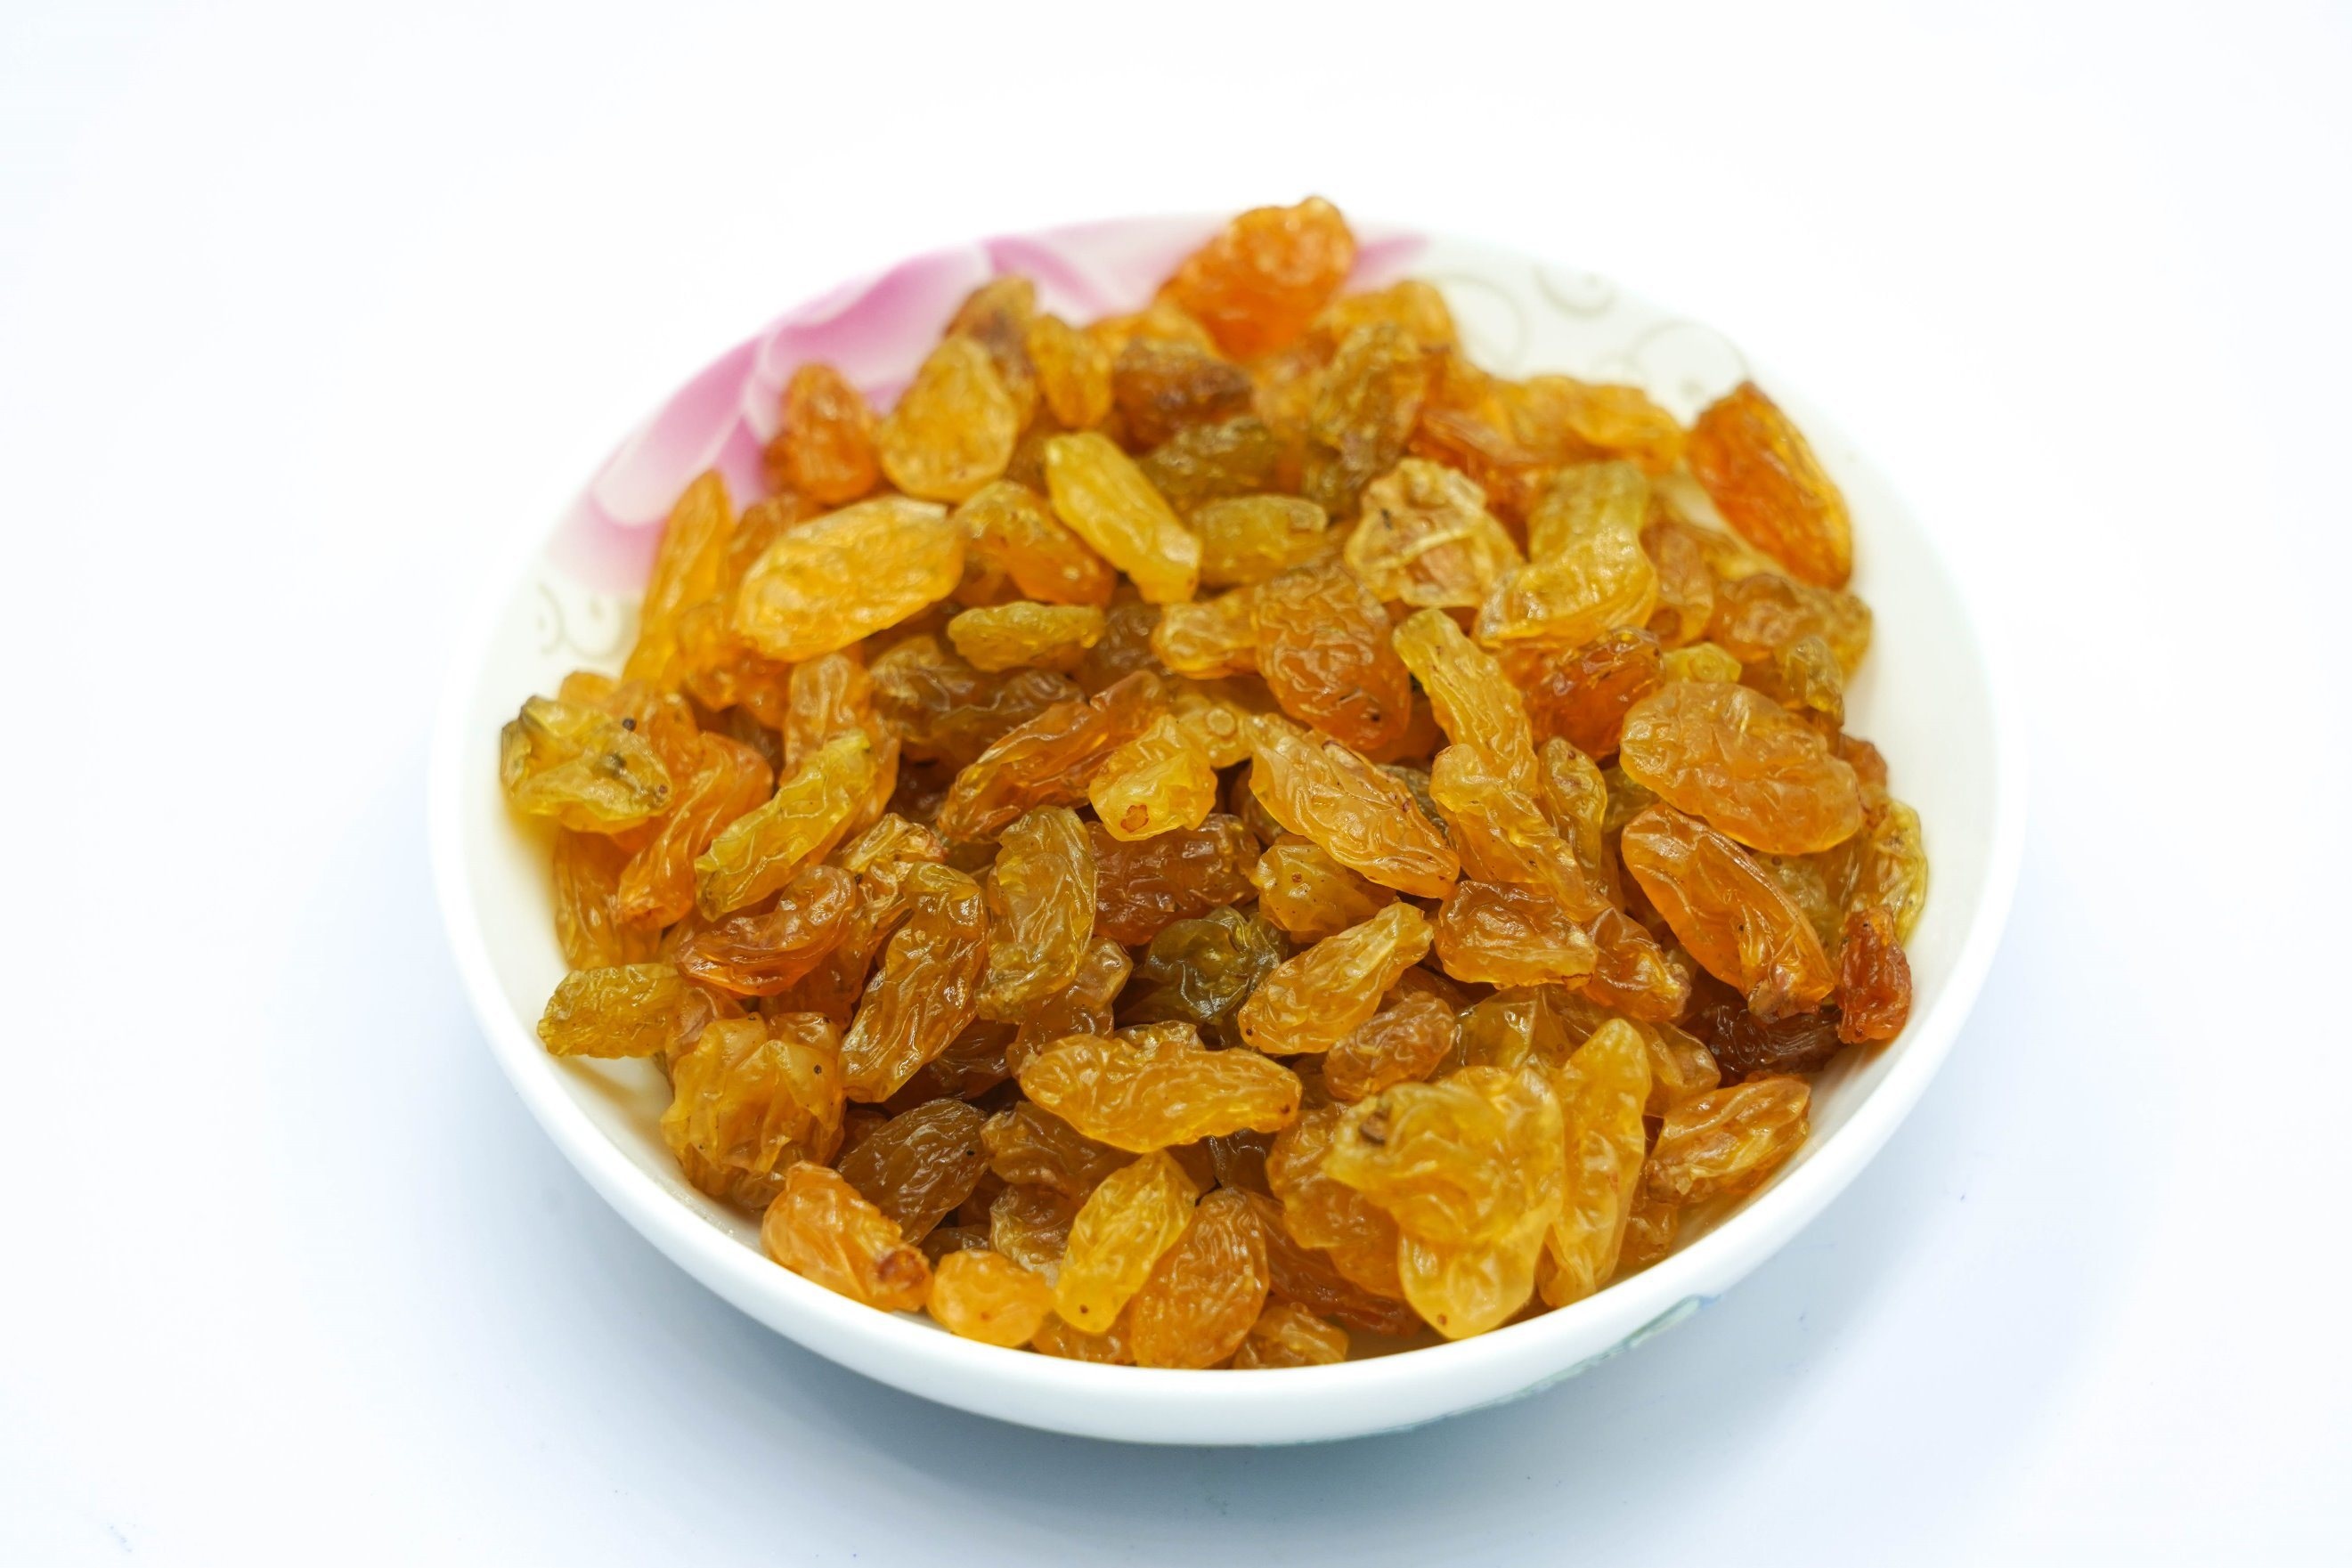 Dried Fruits: Raisins, Eaten raw or used in cooking, baking, and brewing. 2650x1770 HD Background.